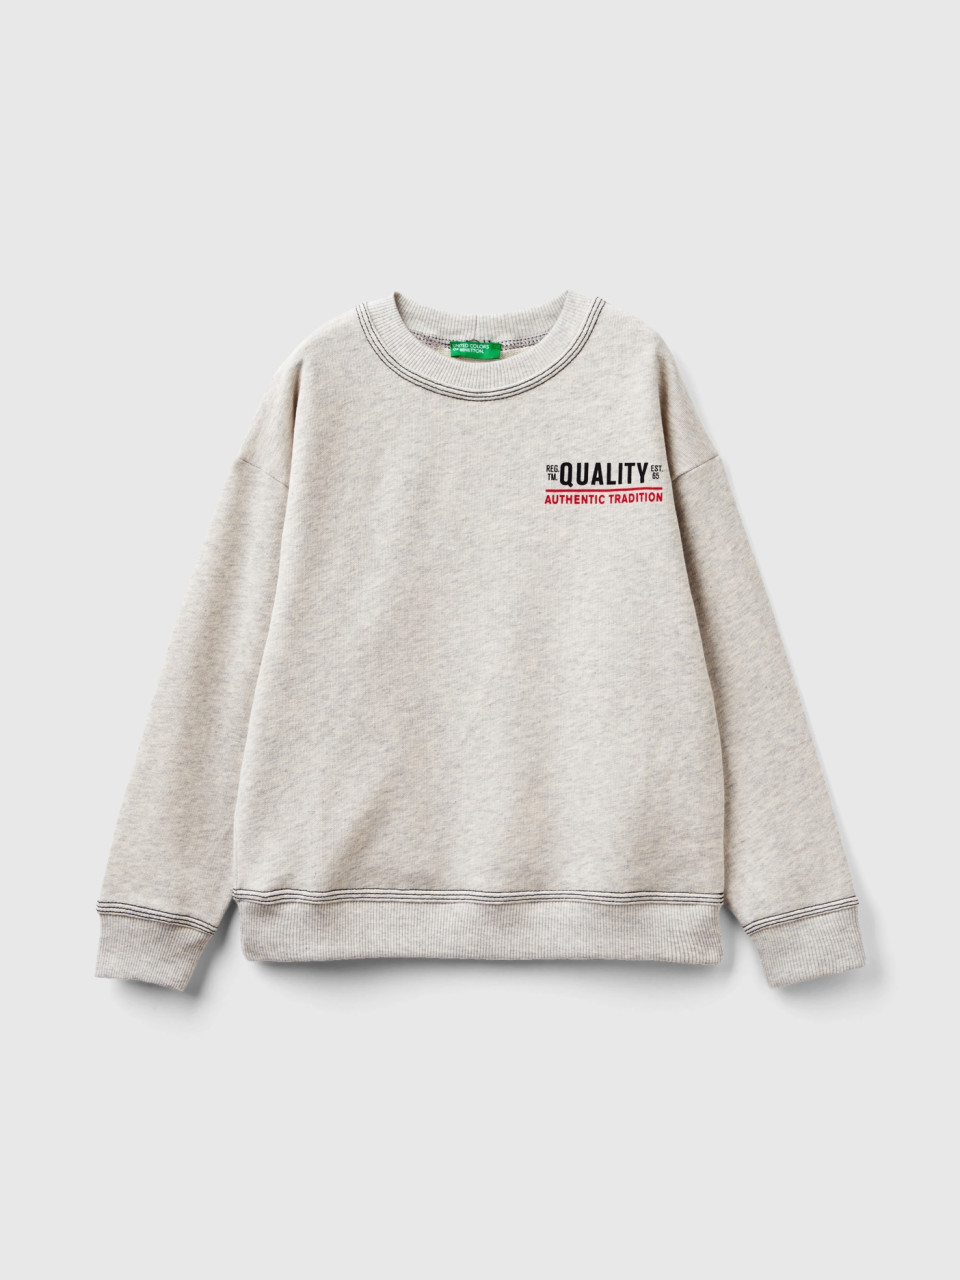 Benetton, Over Fit Sweater Mit Prints, Hellgrau, male